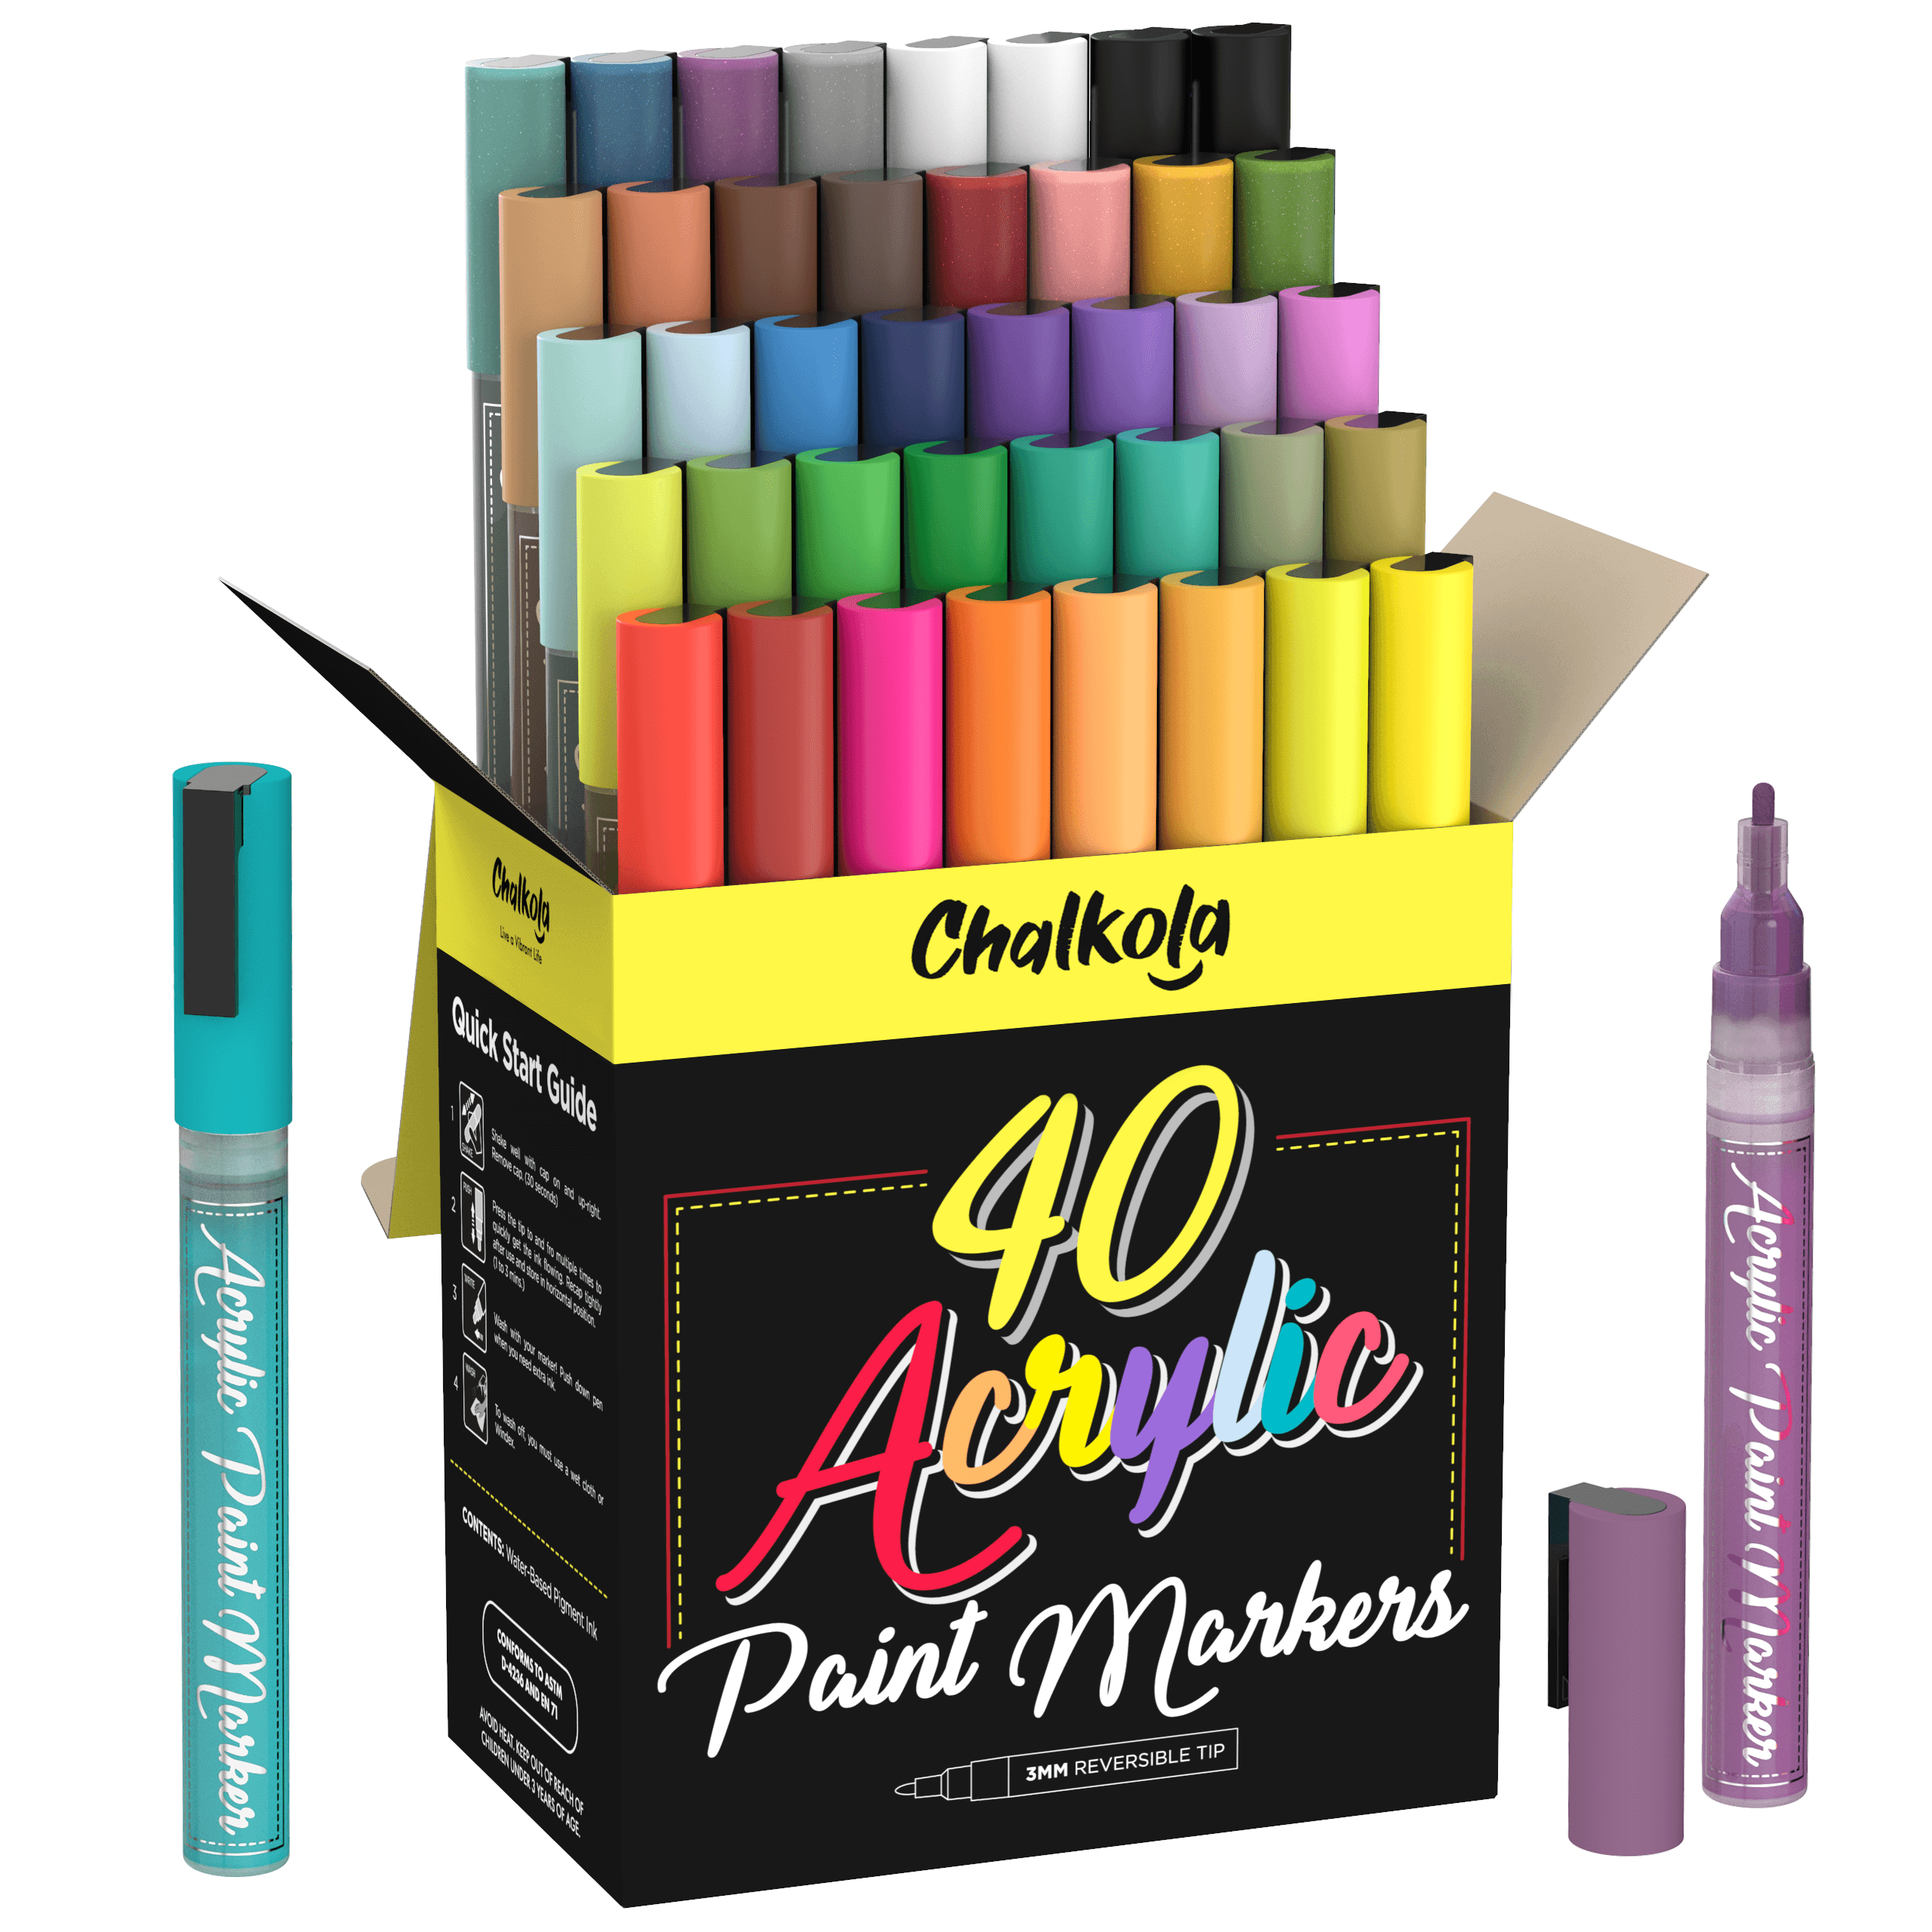 Coloring Bundle with Paper Roll, Markers, and Paint Sticks